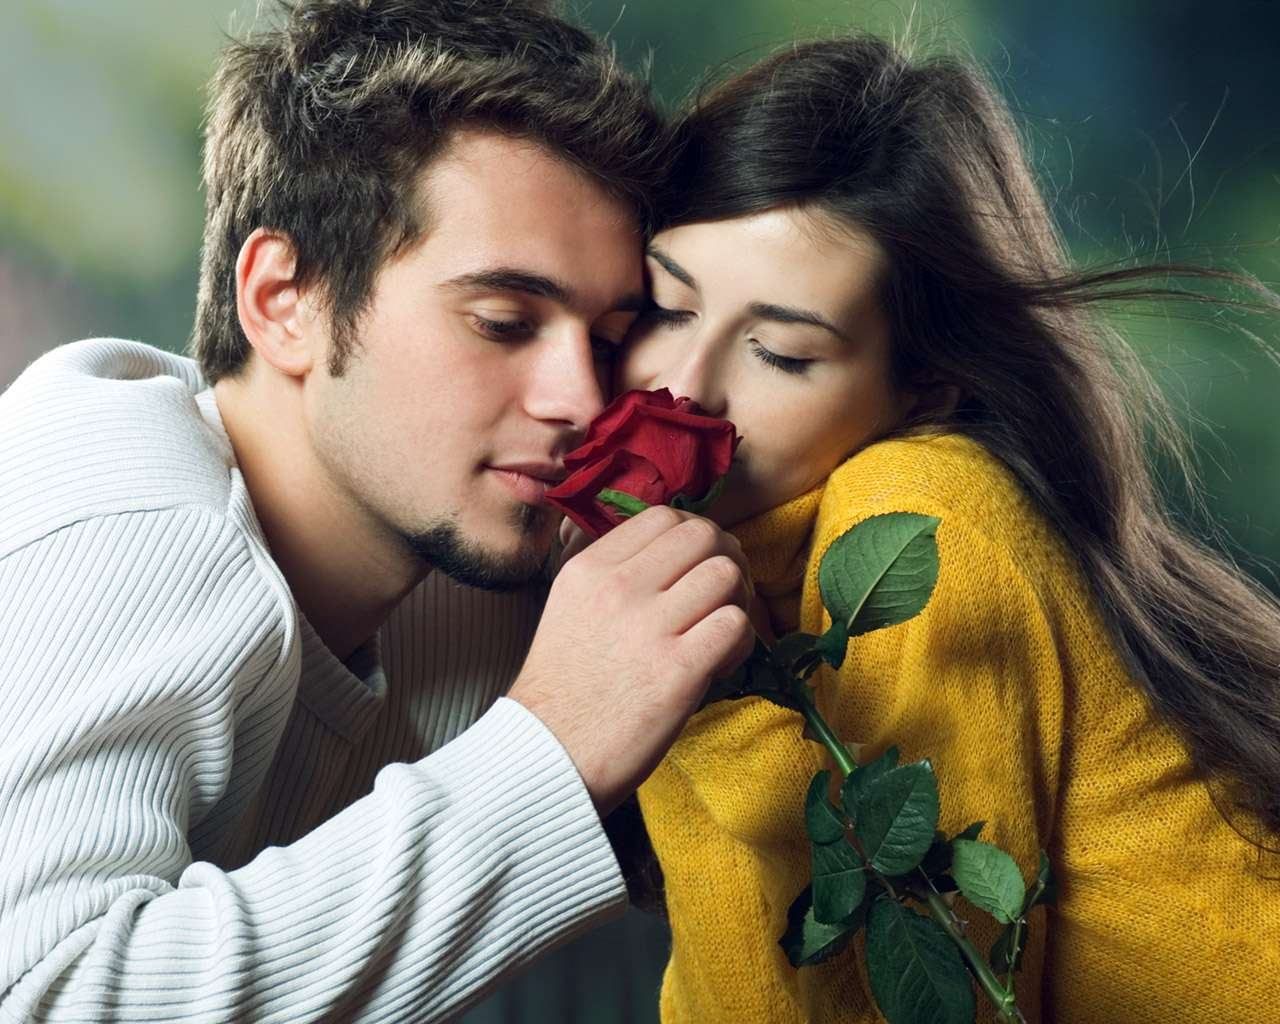 Colletion Of Romantic Love Couple Images Free Download Romantic